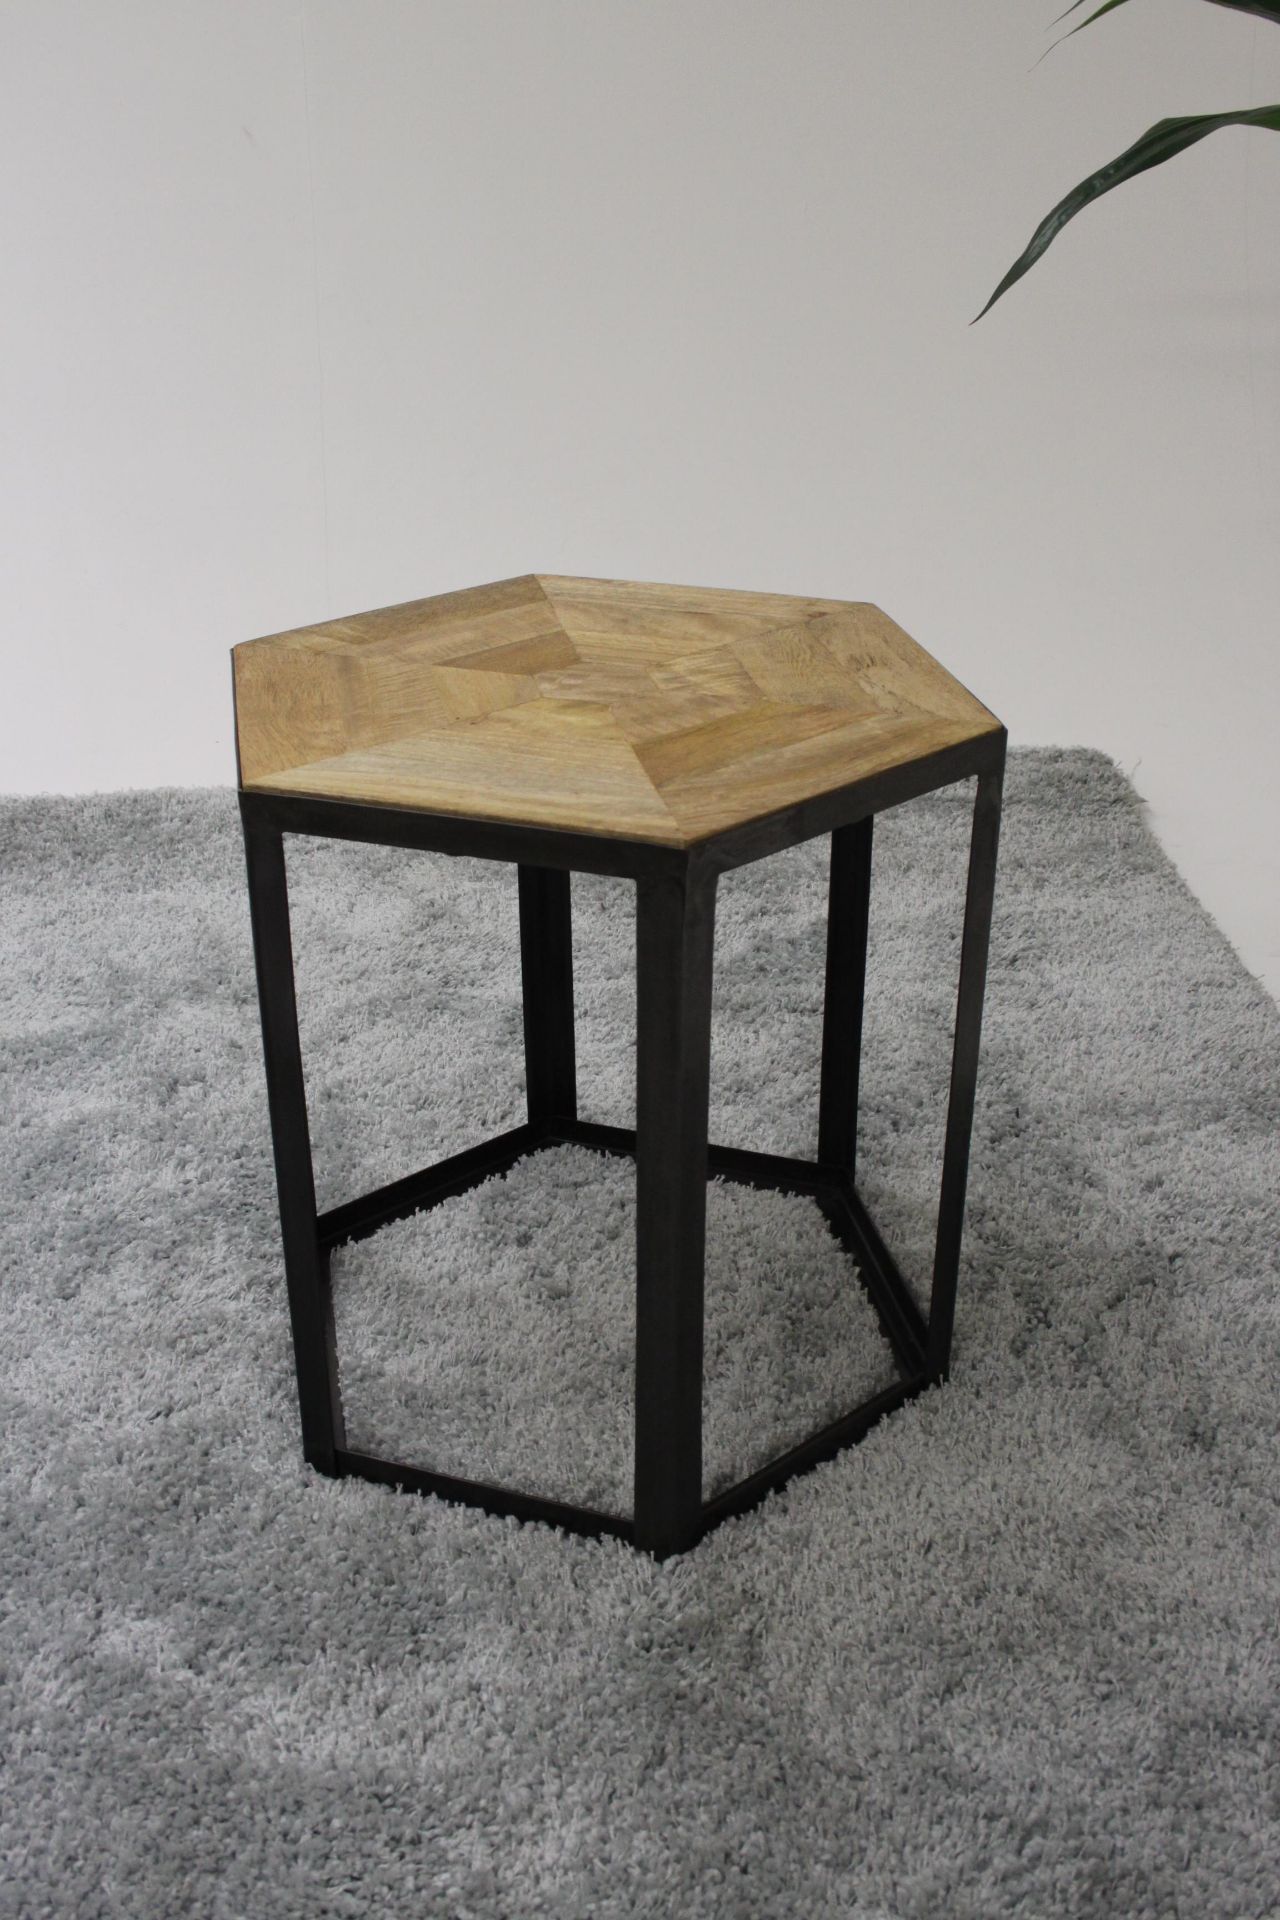 Octagon Bunching Table Antique Natural Wood Solid White Metal An Octagon Shaped Side Table With An - Image 3 of 3